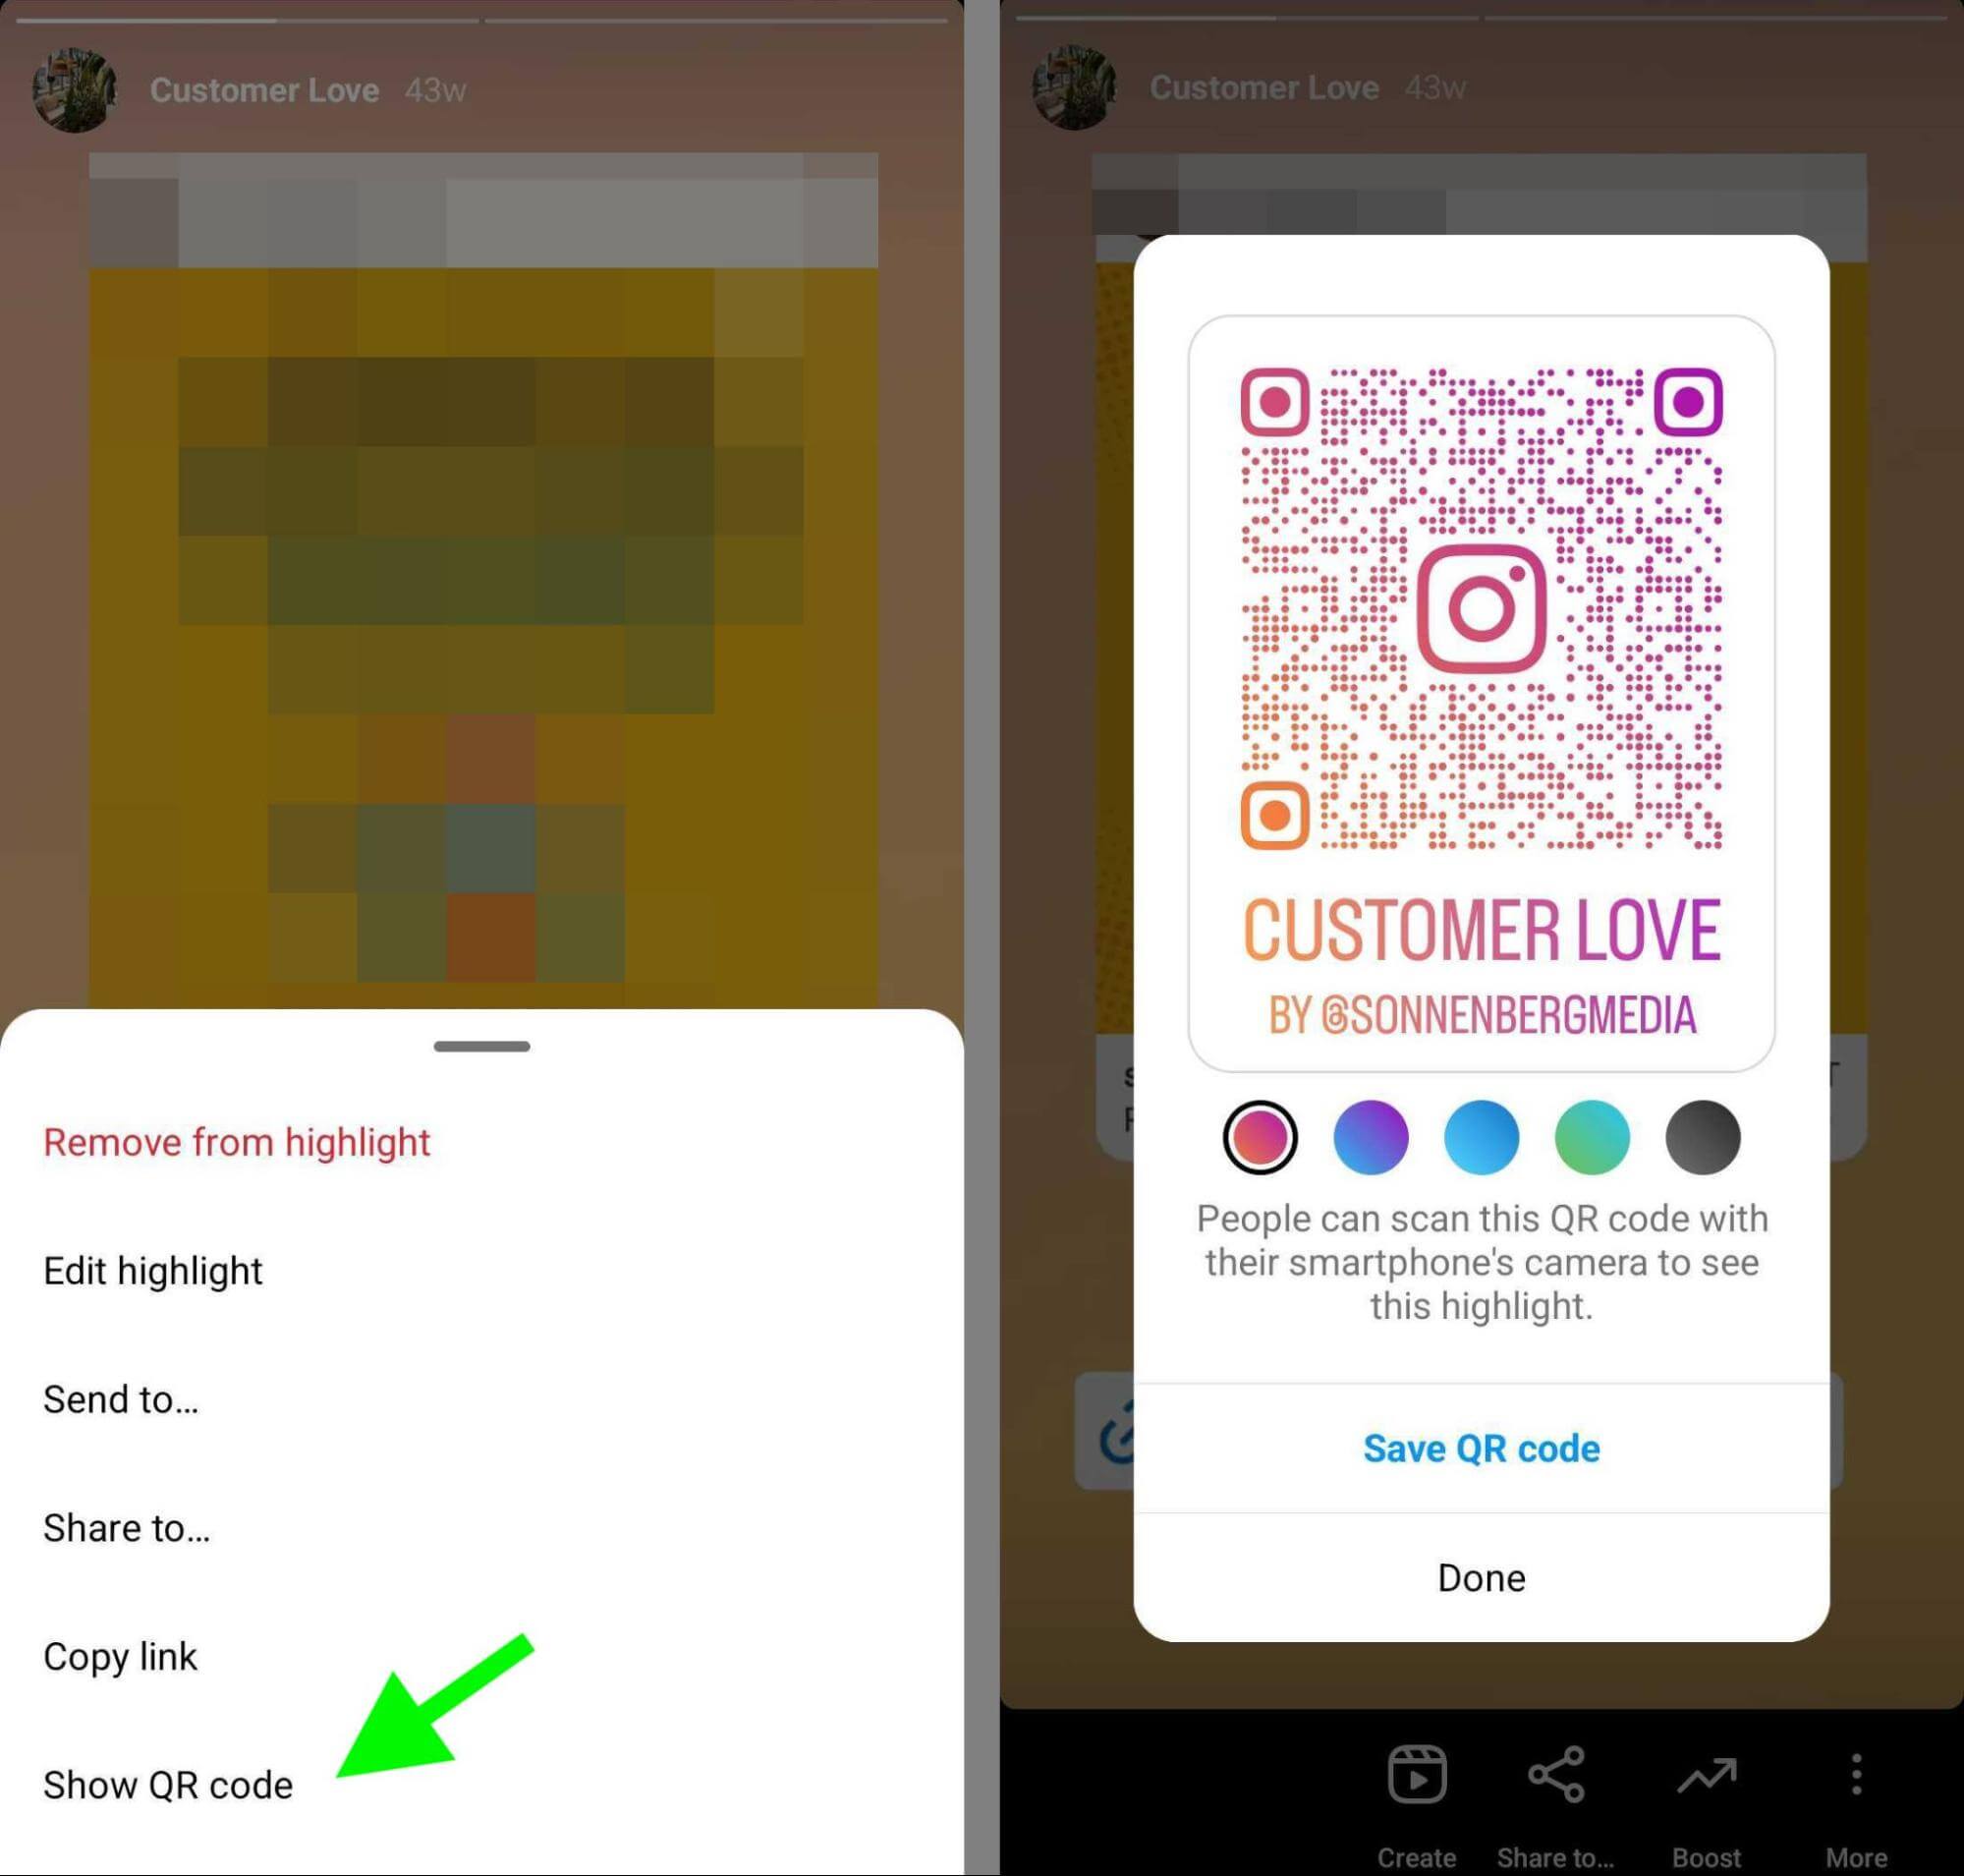 how-to-use-instagram-qr-codes-in-your-marketing-share-user-generated-content-ugc-sonnenberbmedia-example-13